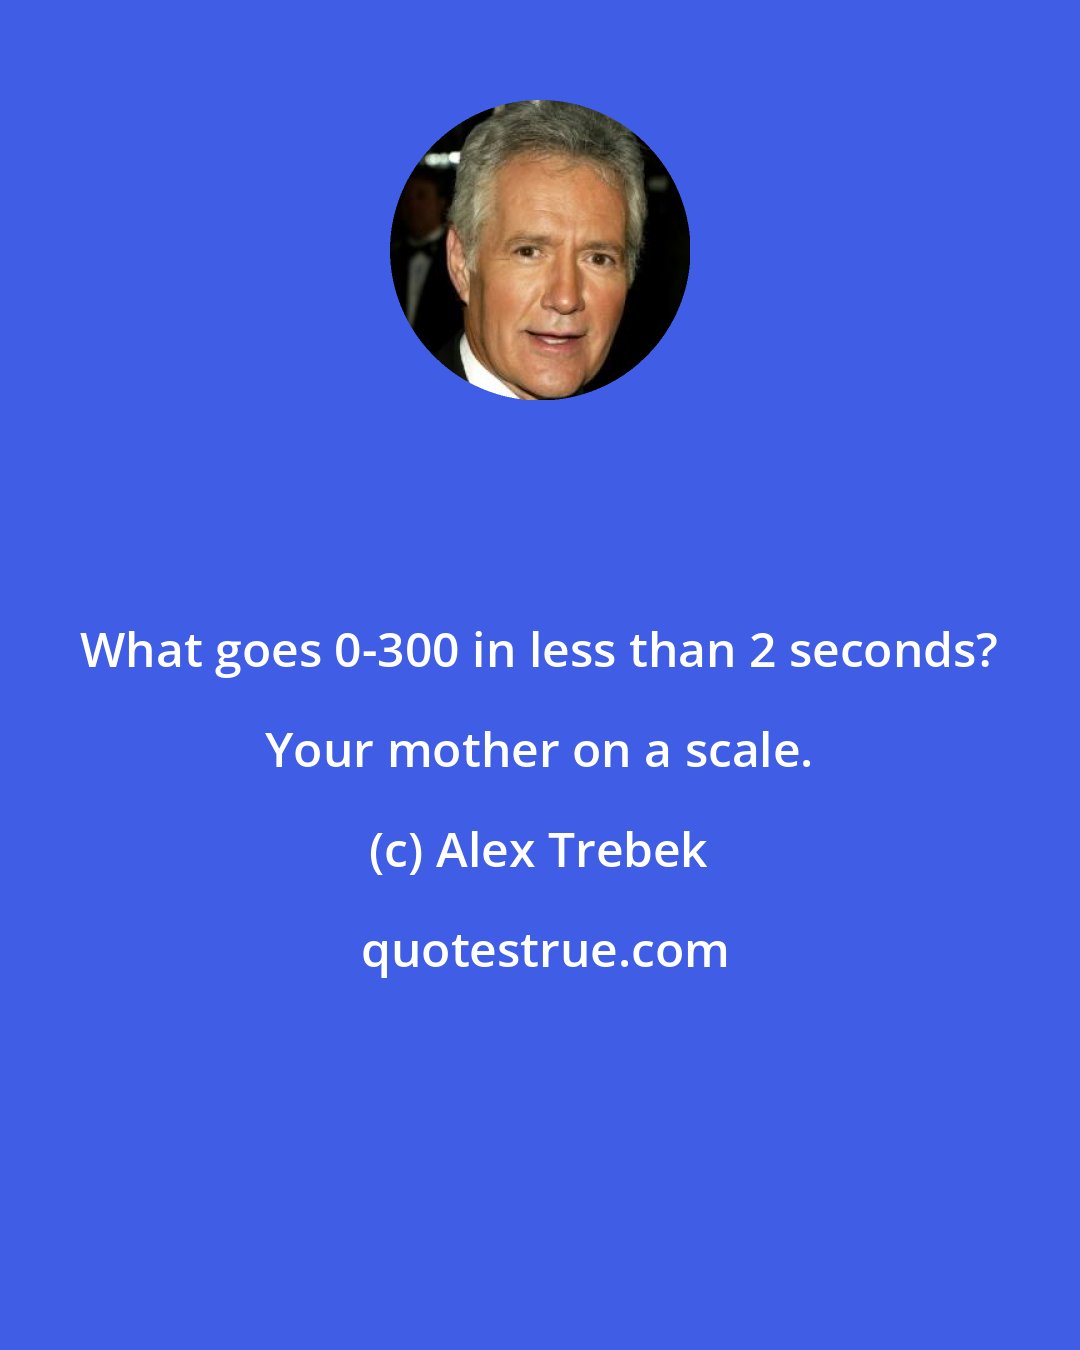 Alex Trebek: What goes 0-300 in less than 2 seconds? Your mother on a scale.